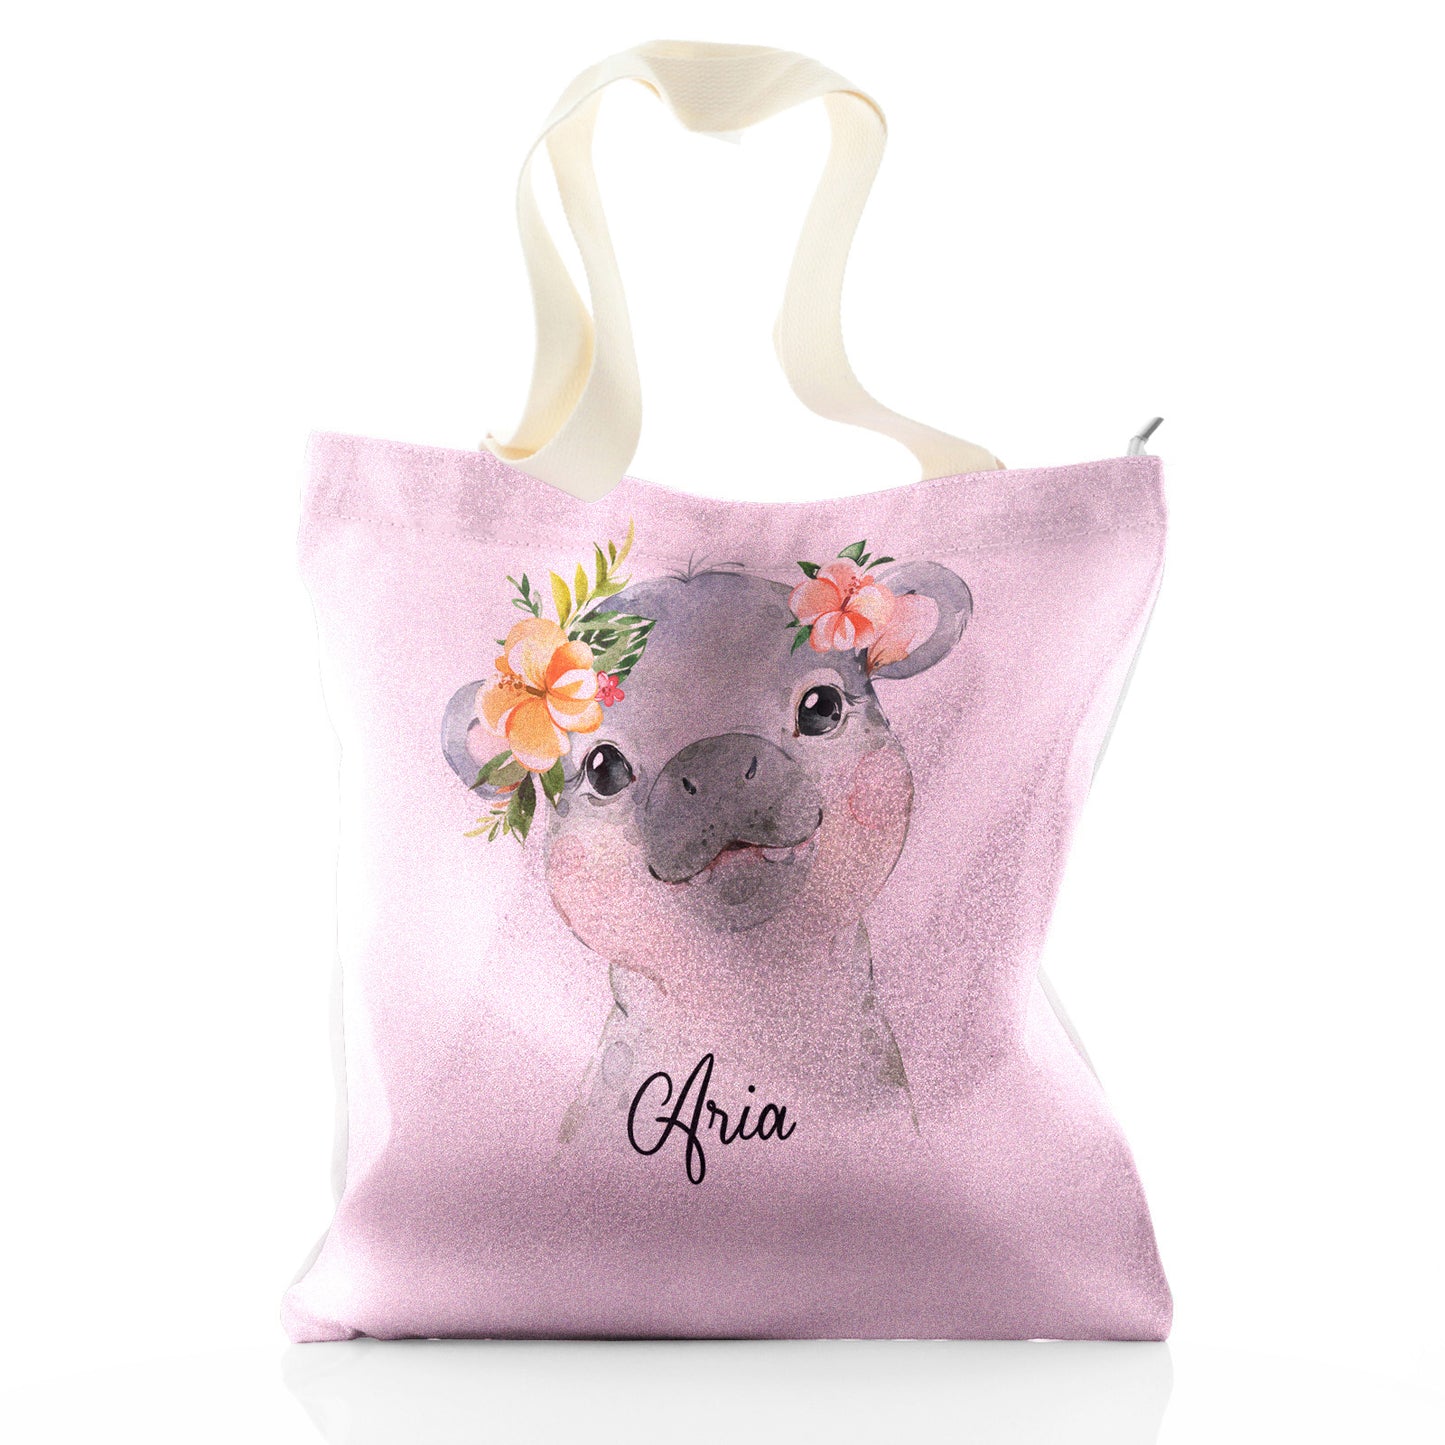 Personalised Glitter Tote Bag with Hippo Peach Flowers and Cute Text